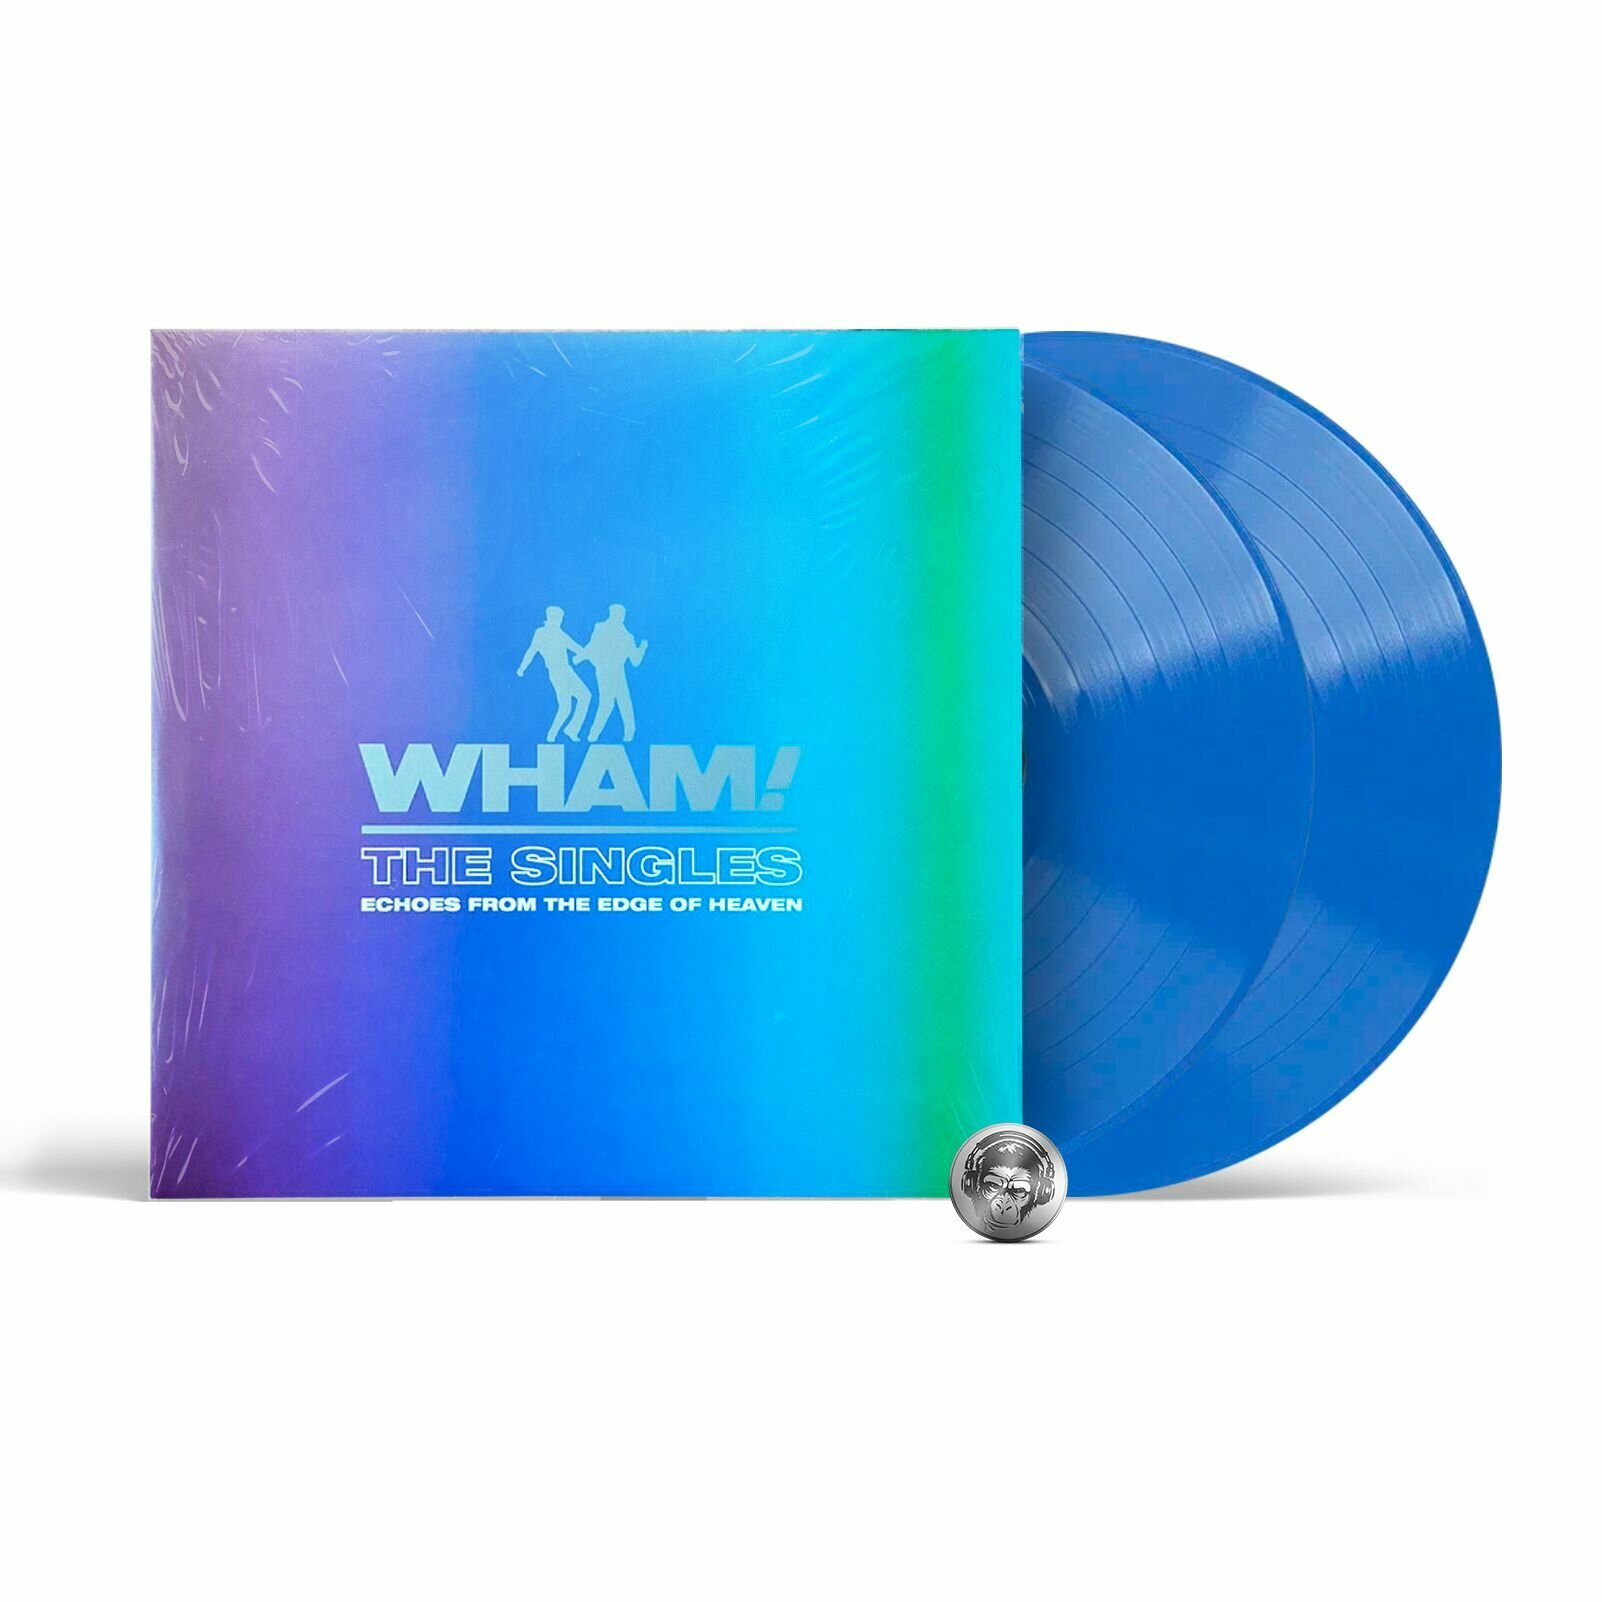 Wham! - The Singles: Echoes From The Edge Of Heaven (2LP) Blue Vinyl, Gatefold, Limited edition Виниловая пластинка